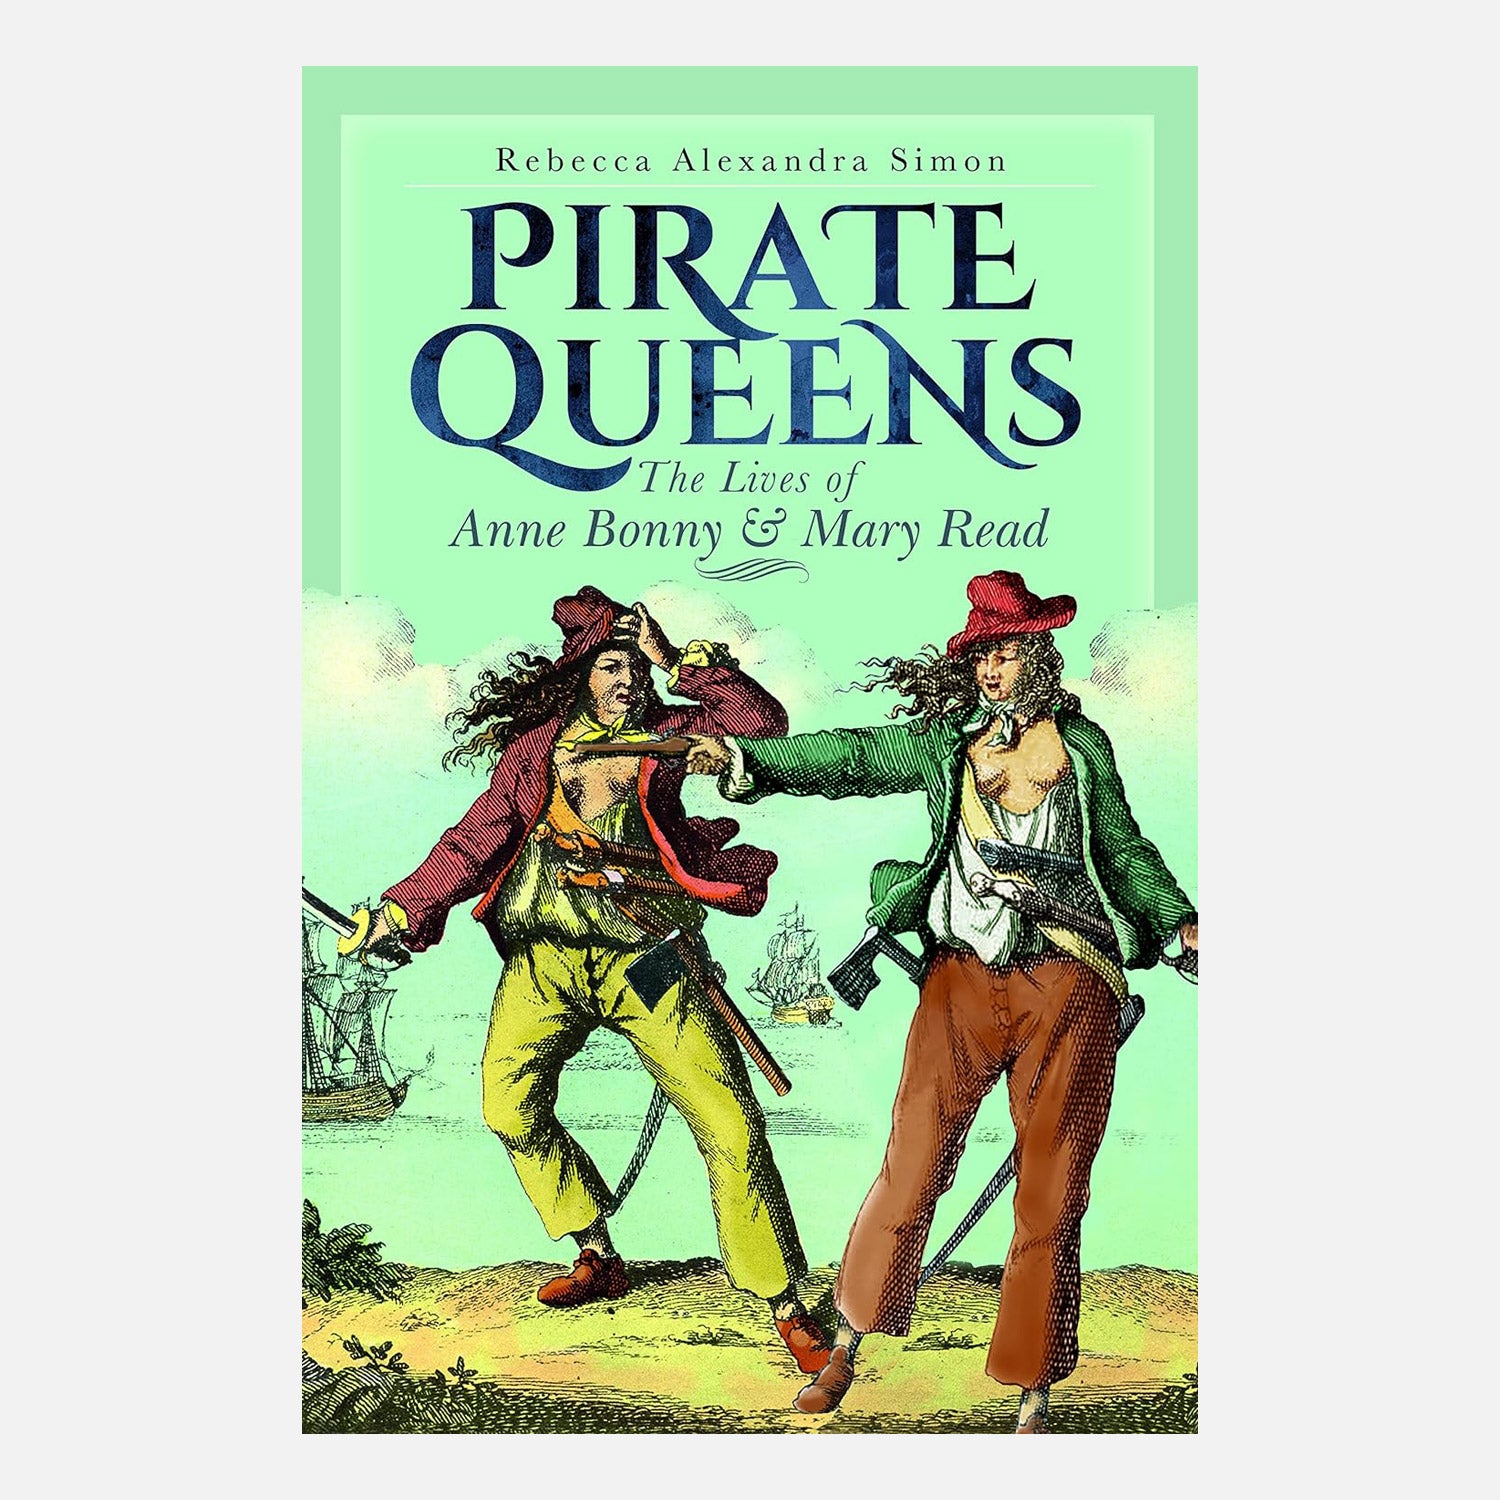 Pirate Queens: The Lives of Anne Bonny & Mary Read by Rebecca Alexandra Simon. Artist depiction of Anne Bonny & Mary Reed as pirates on a beach with ships in the sea behind.